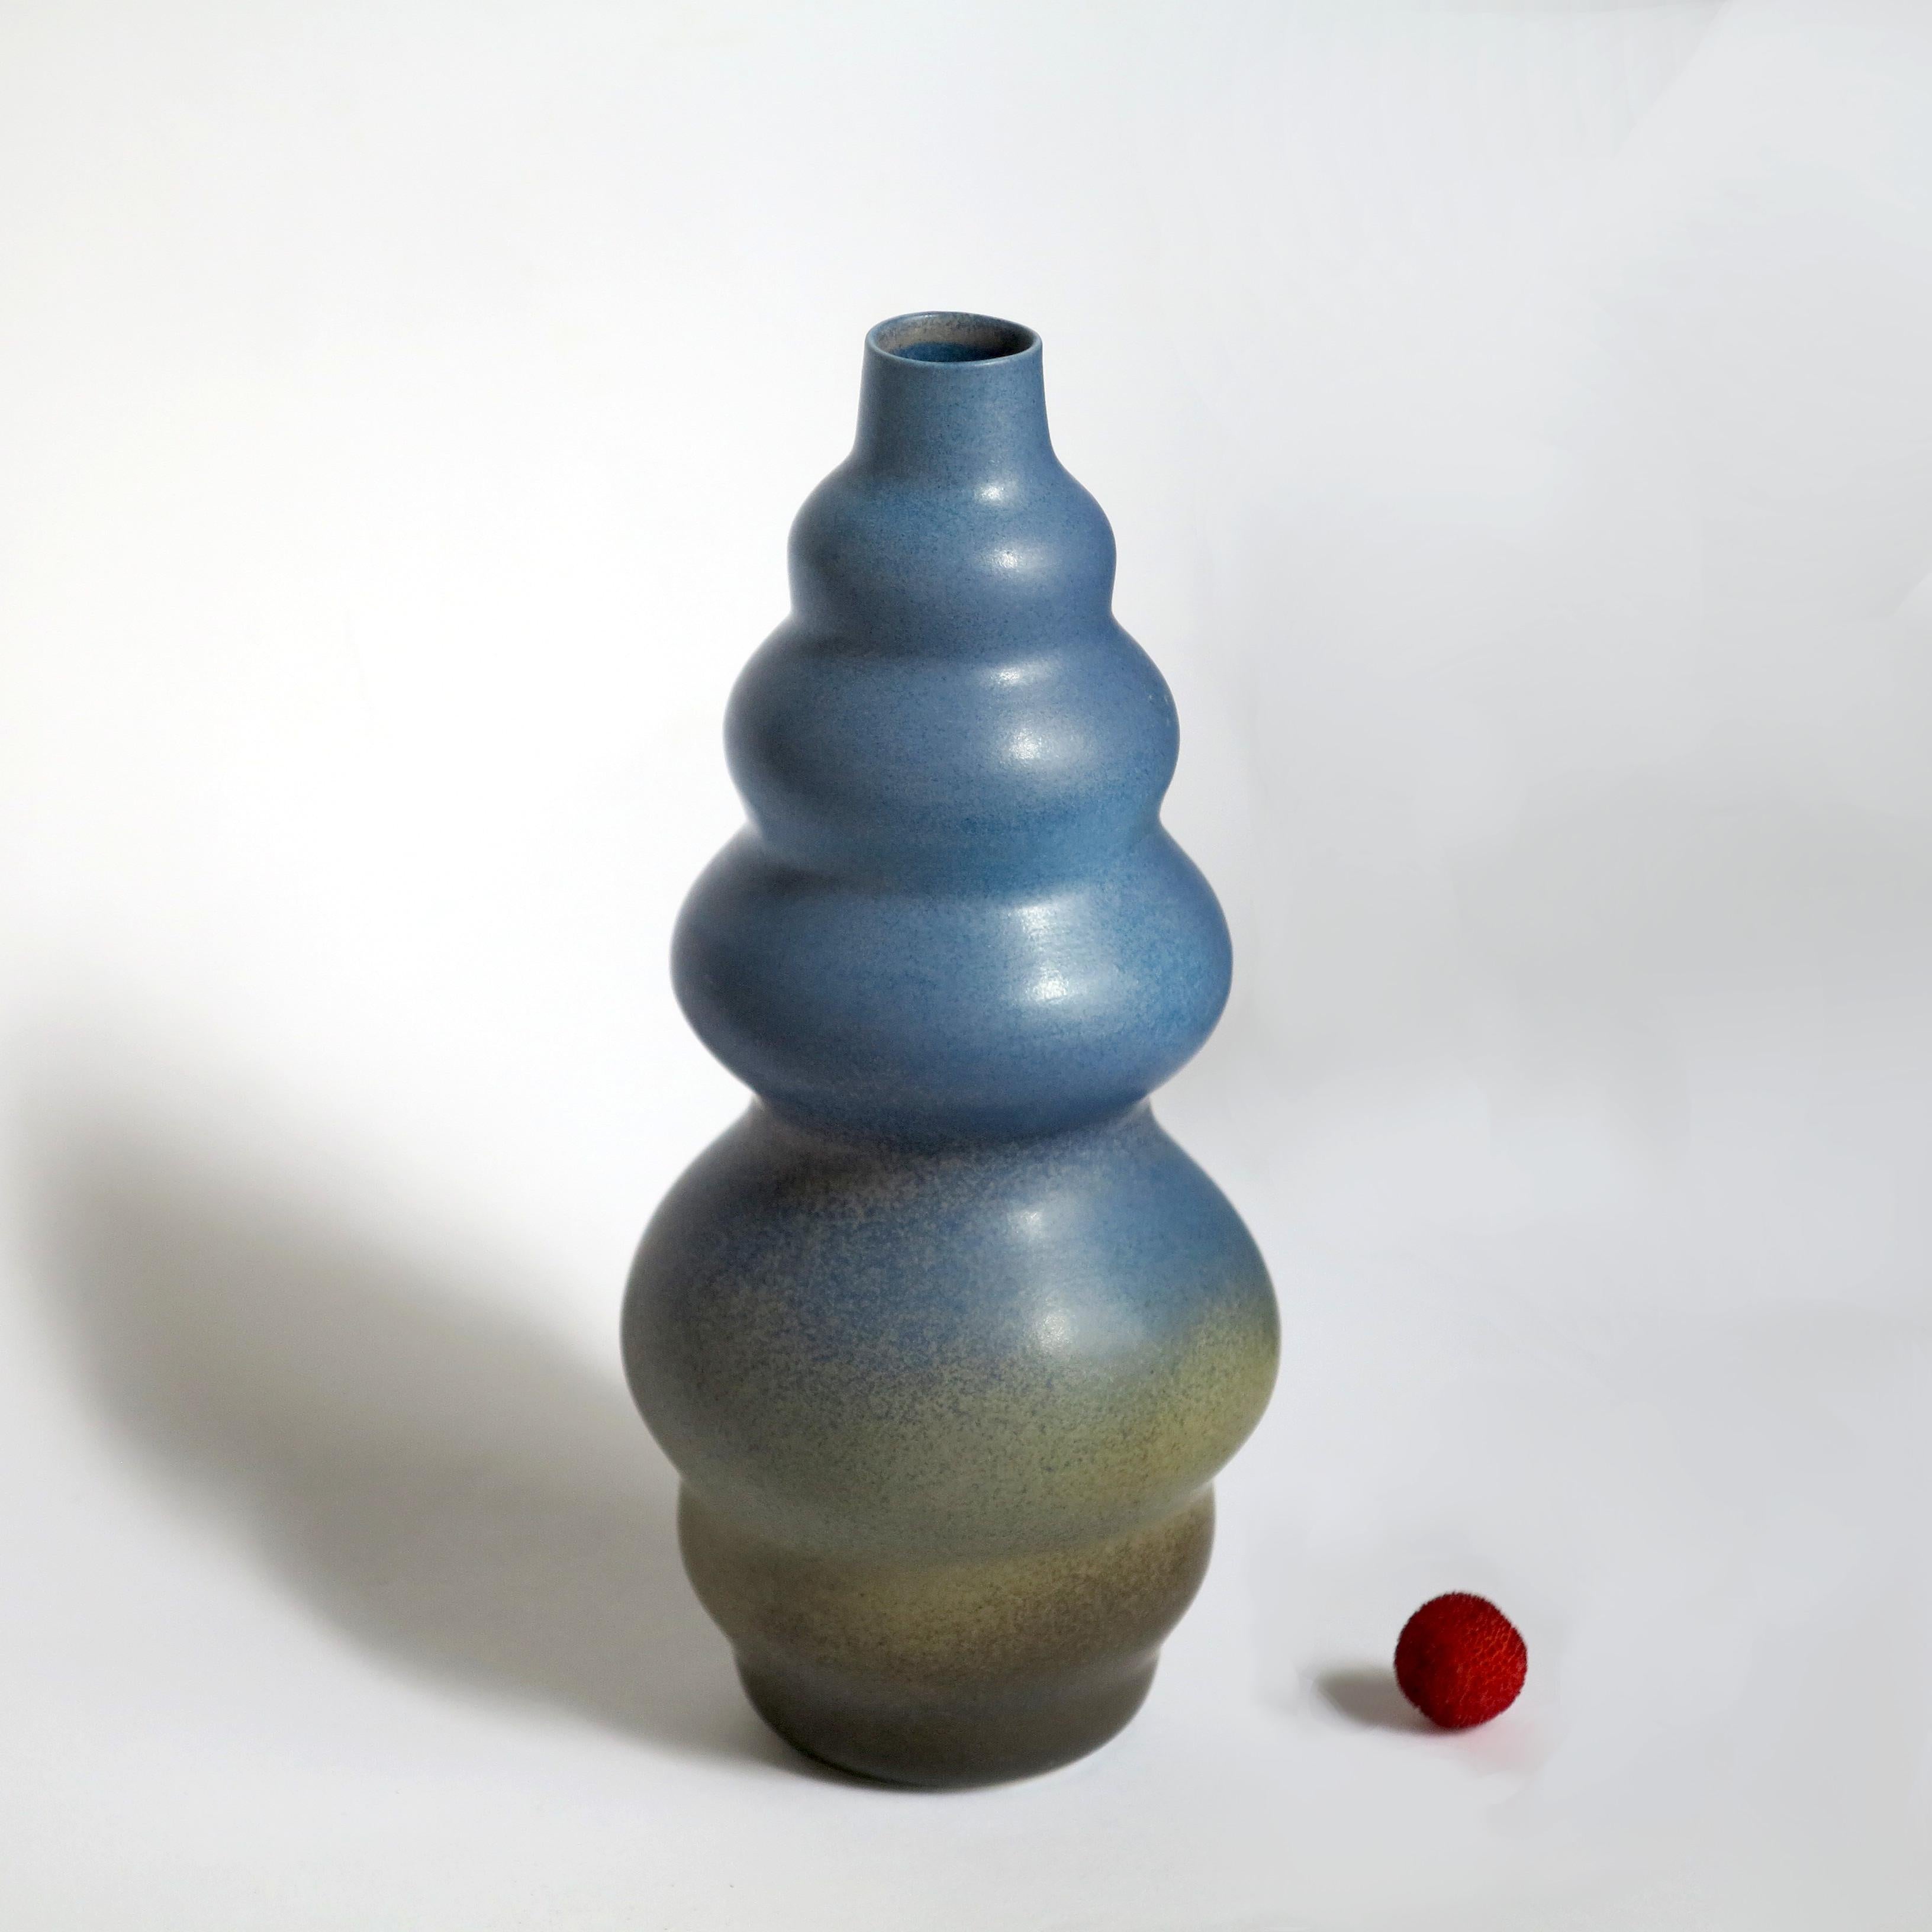 Grand vase Jaune by Cica Gomez
Dimensions: Ø 8 x H 20.5 cm
Materials: Porcelain


Usual objects. My work is first driven by the search for the line. The one that it draw when the object takes shape and place in space. That which delimits a